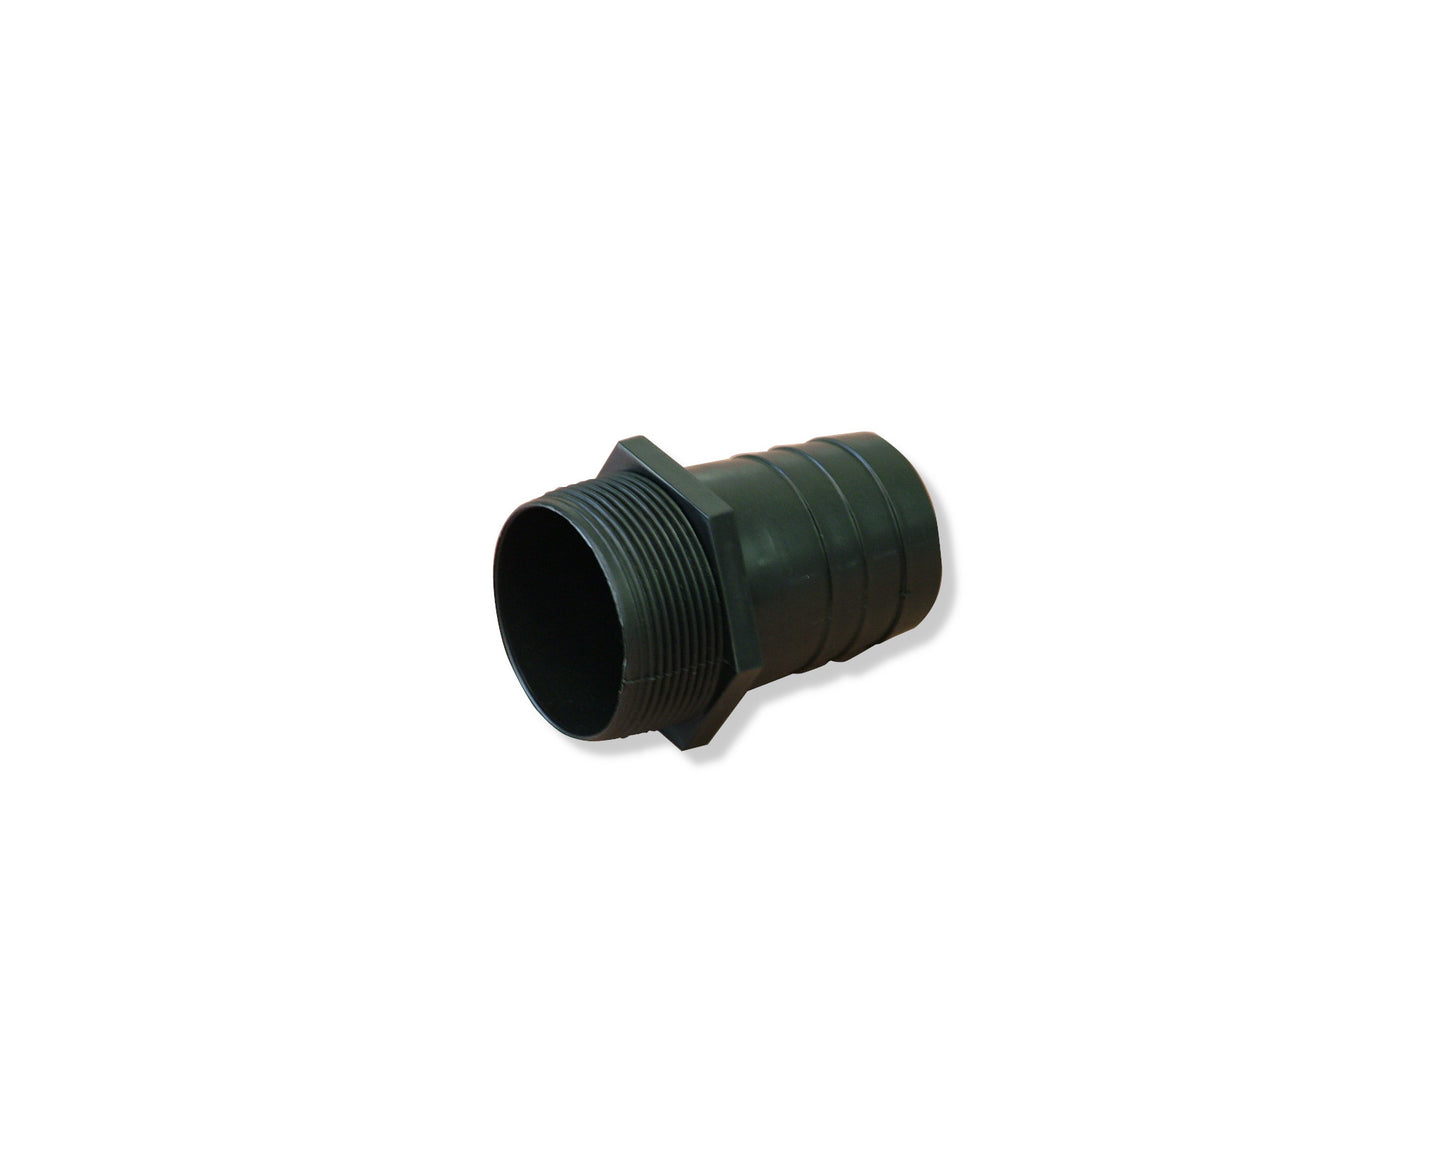 Submersible Pump Accessories and Parts